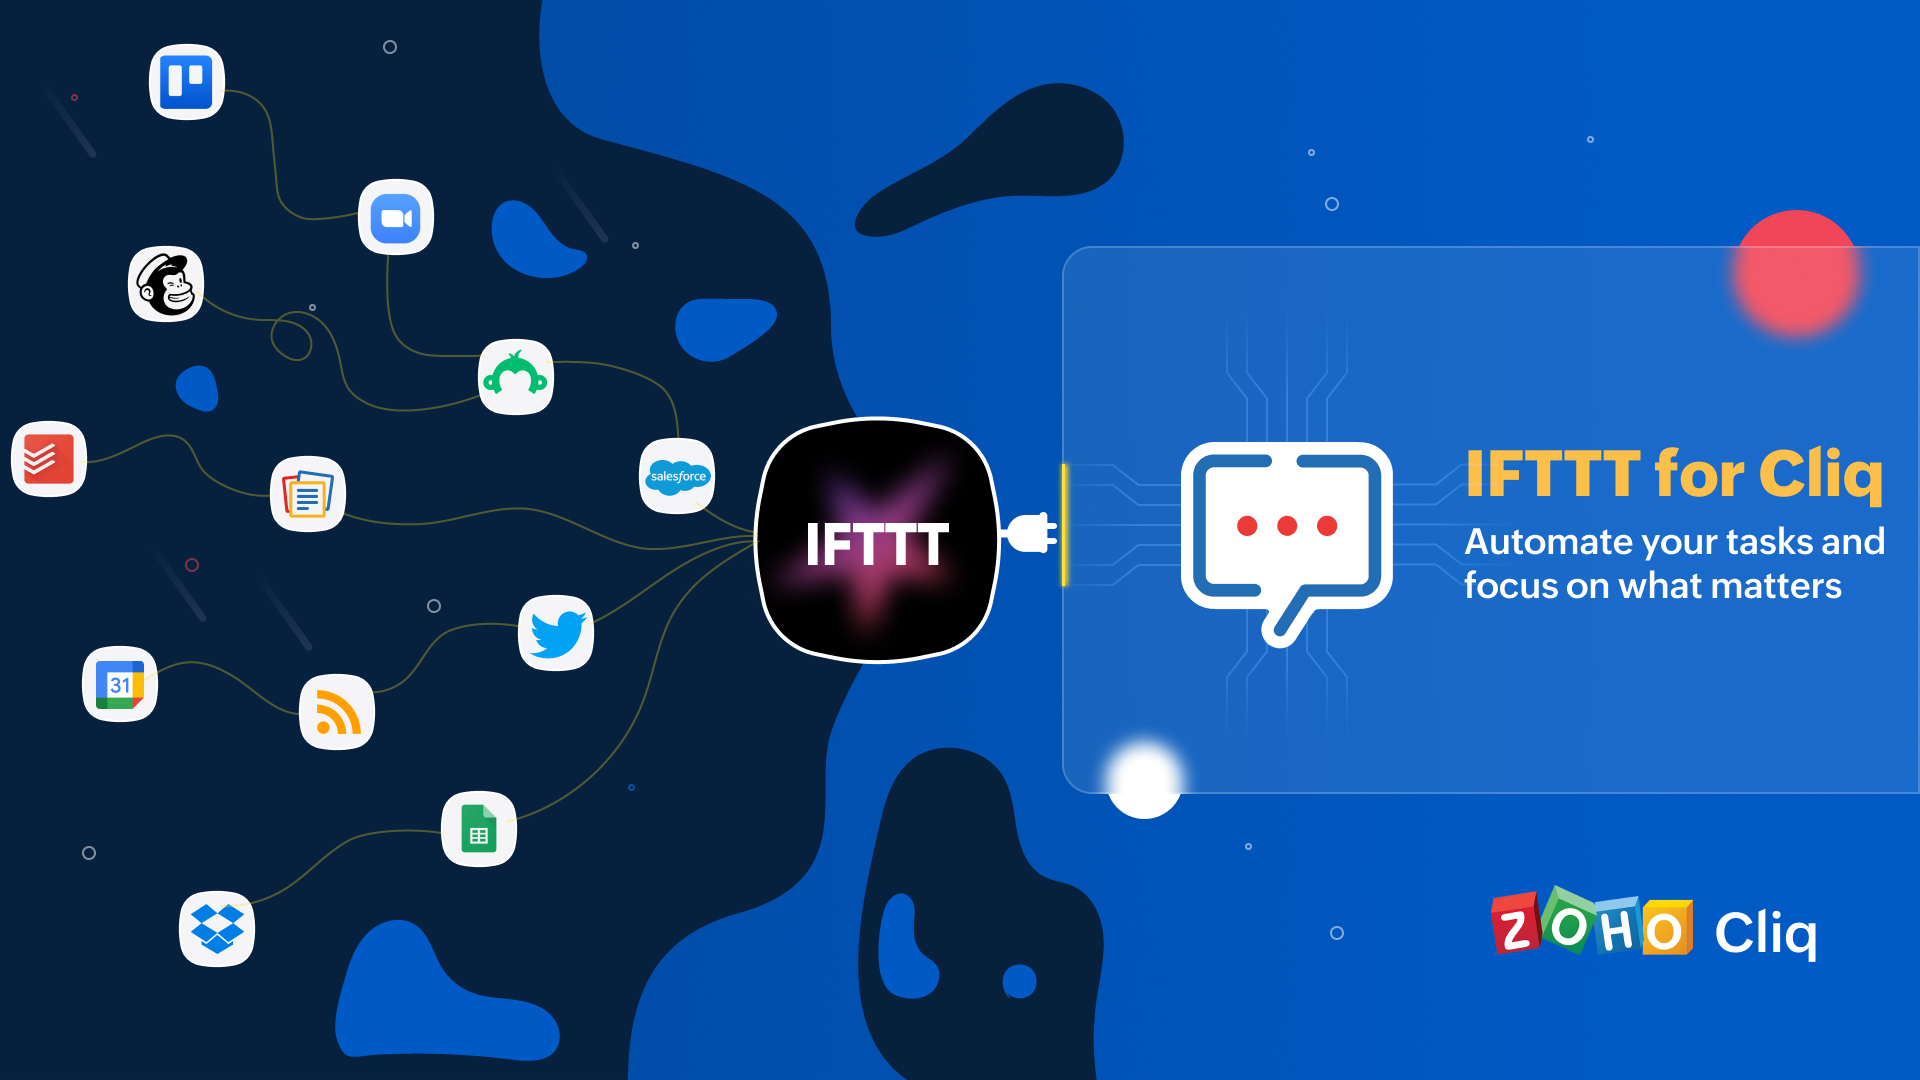 IFTTT for Cliq: Automate your tasks and focus on what matters